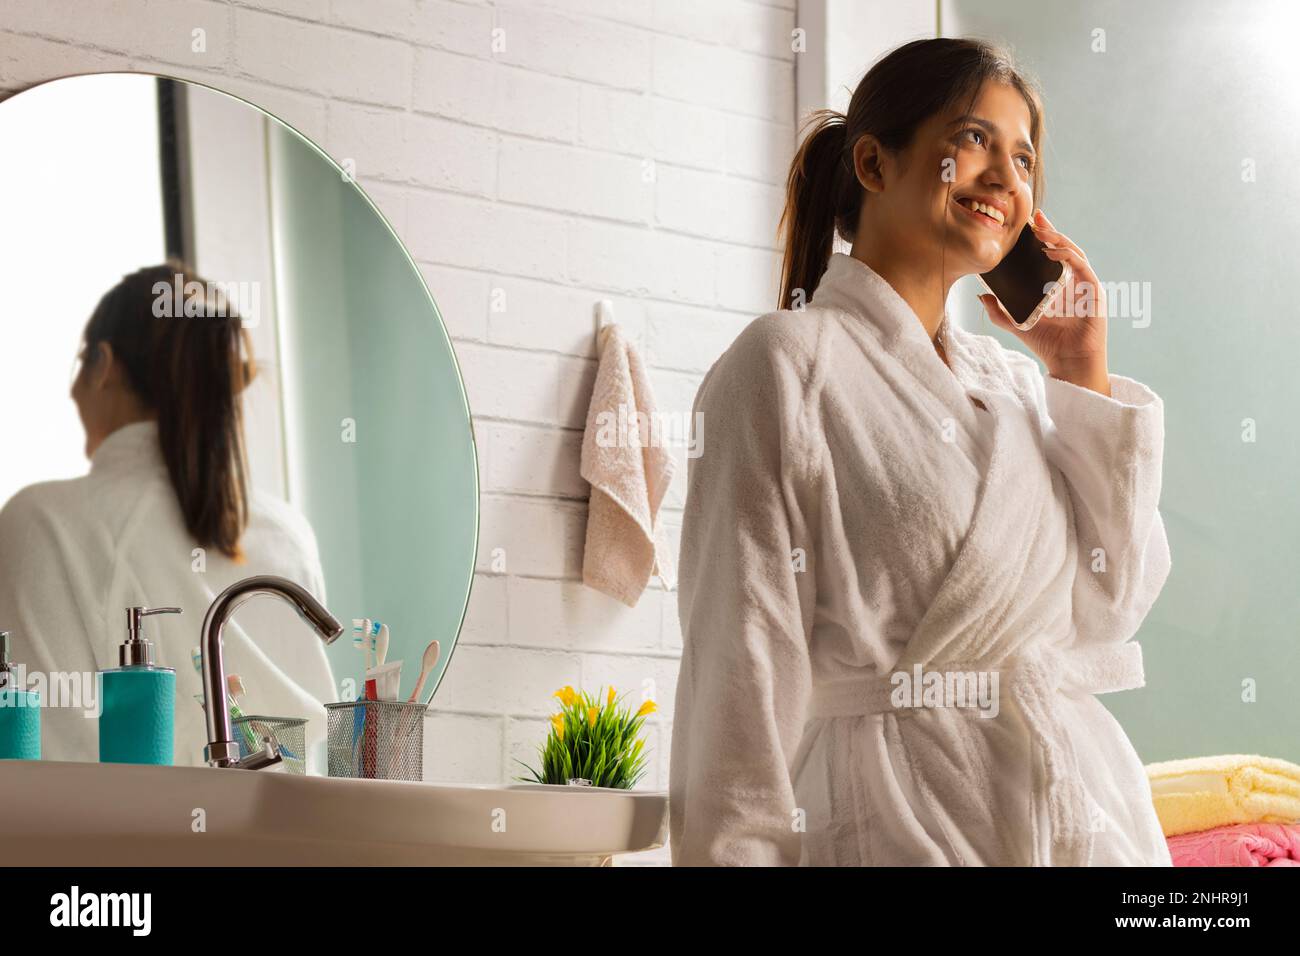 Woman in bathrobes talking on mobile phone in bathroom Stock Photo